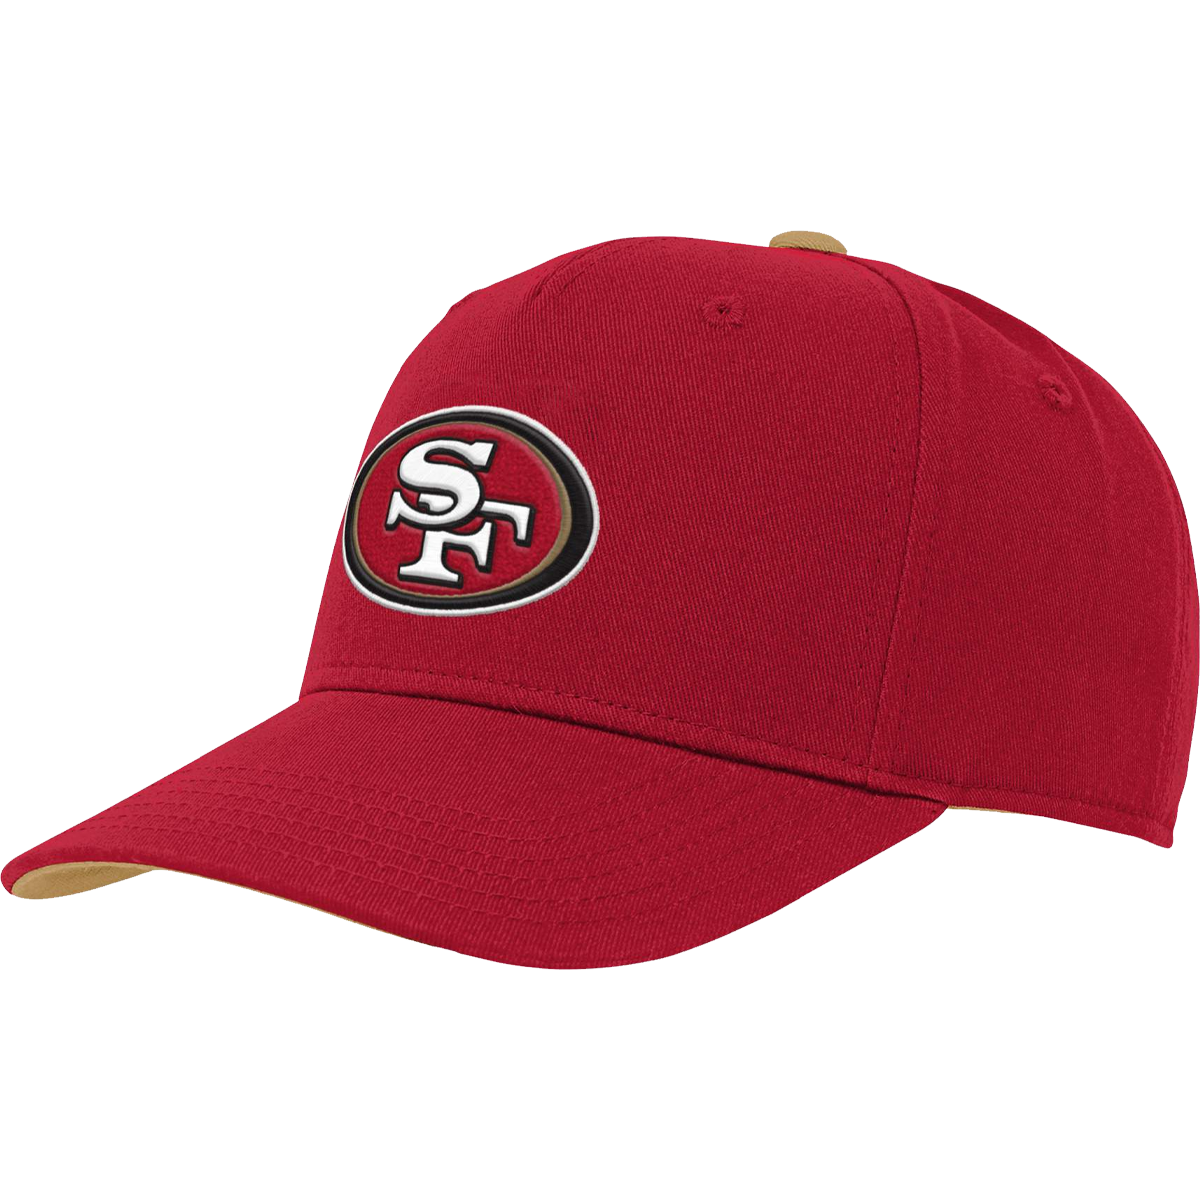 Youth 49ers Pre-Curved Snapback – Sports Basement